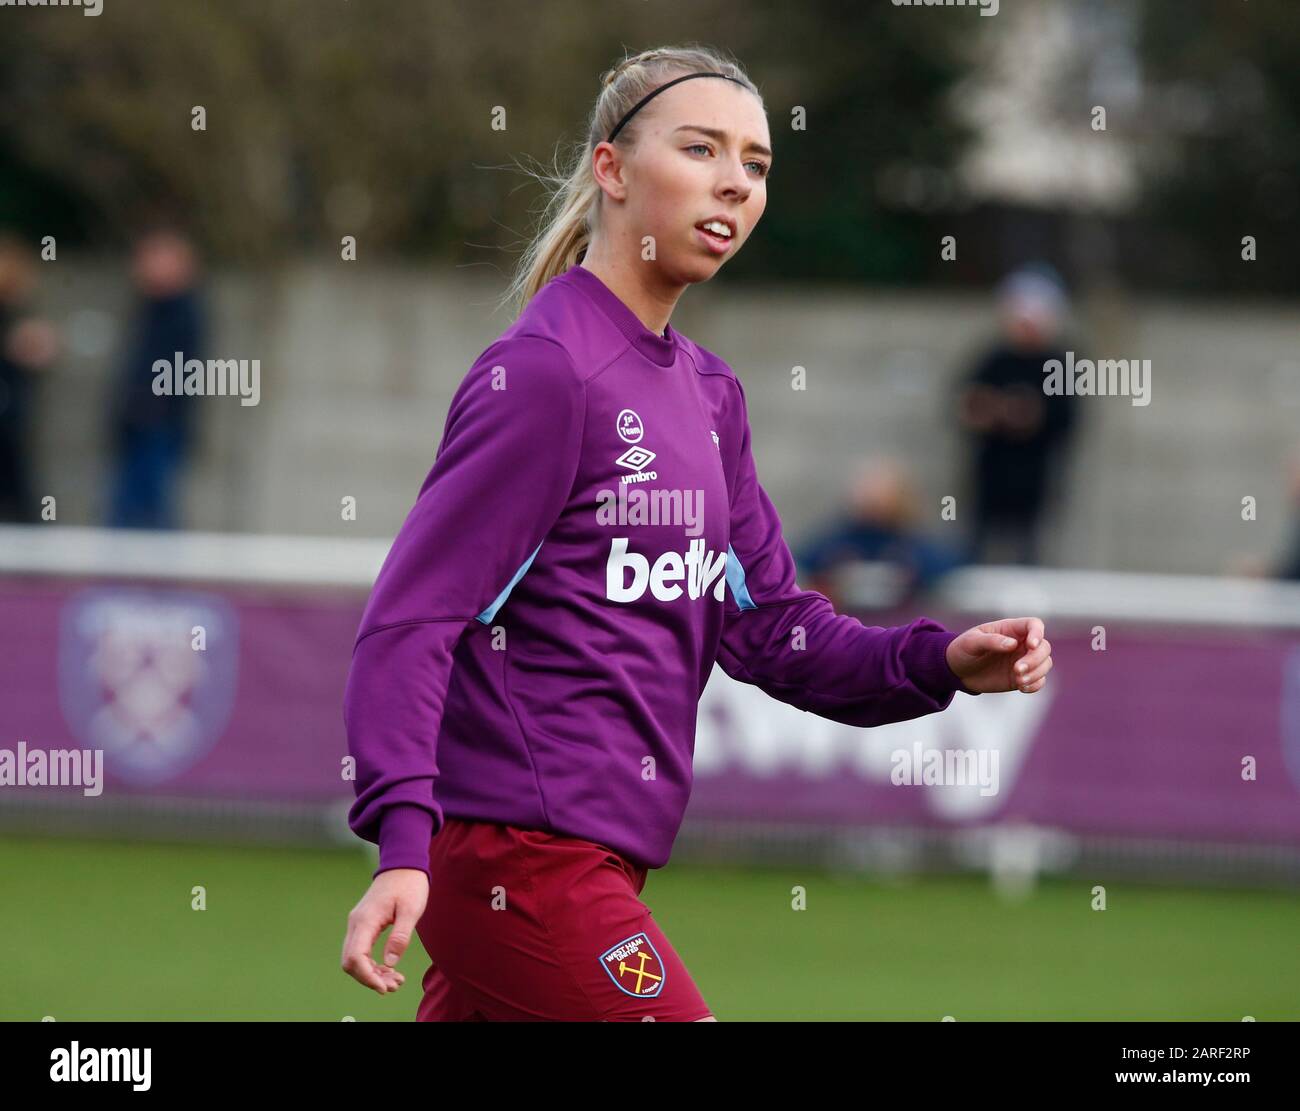 DAGENHAM, ENGLAND - JANUARY 27: Olivia Smith of West Ham United WFC new  signing during Women's FA Cup Fourth Round match between West Ham United  Women and Arsenal at Rush Green Stadium